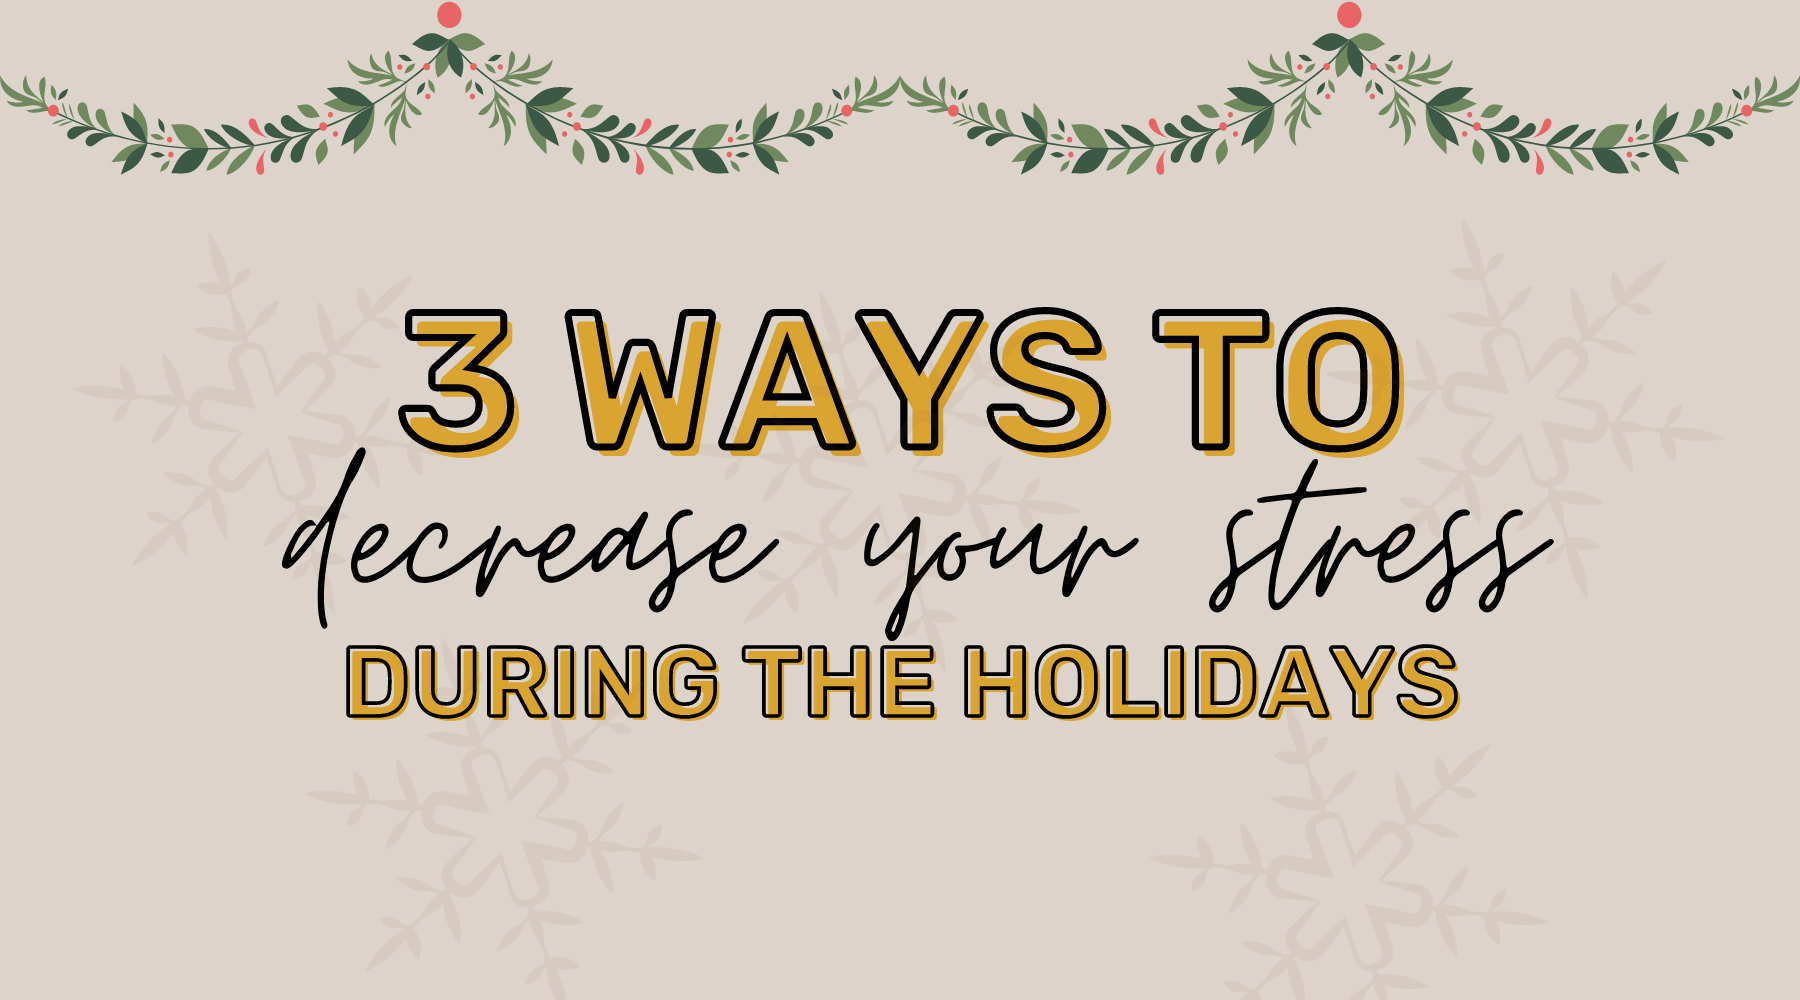 On a tan background with a green garland adorning the top, it reads "3 ways to decrease your stress during the holidays"